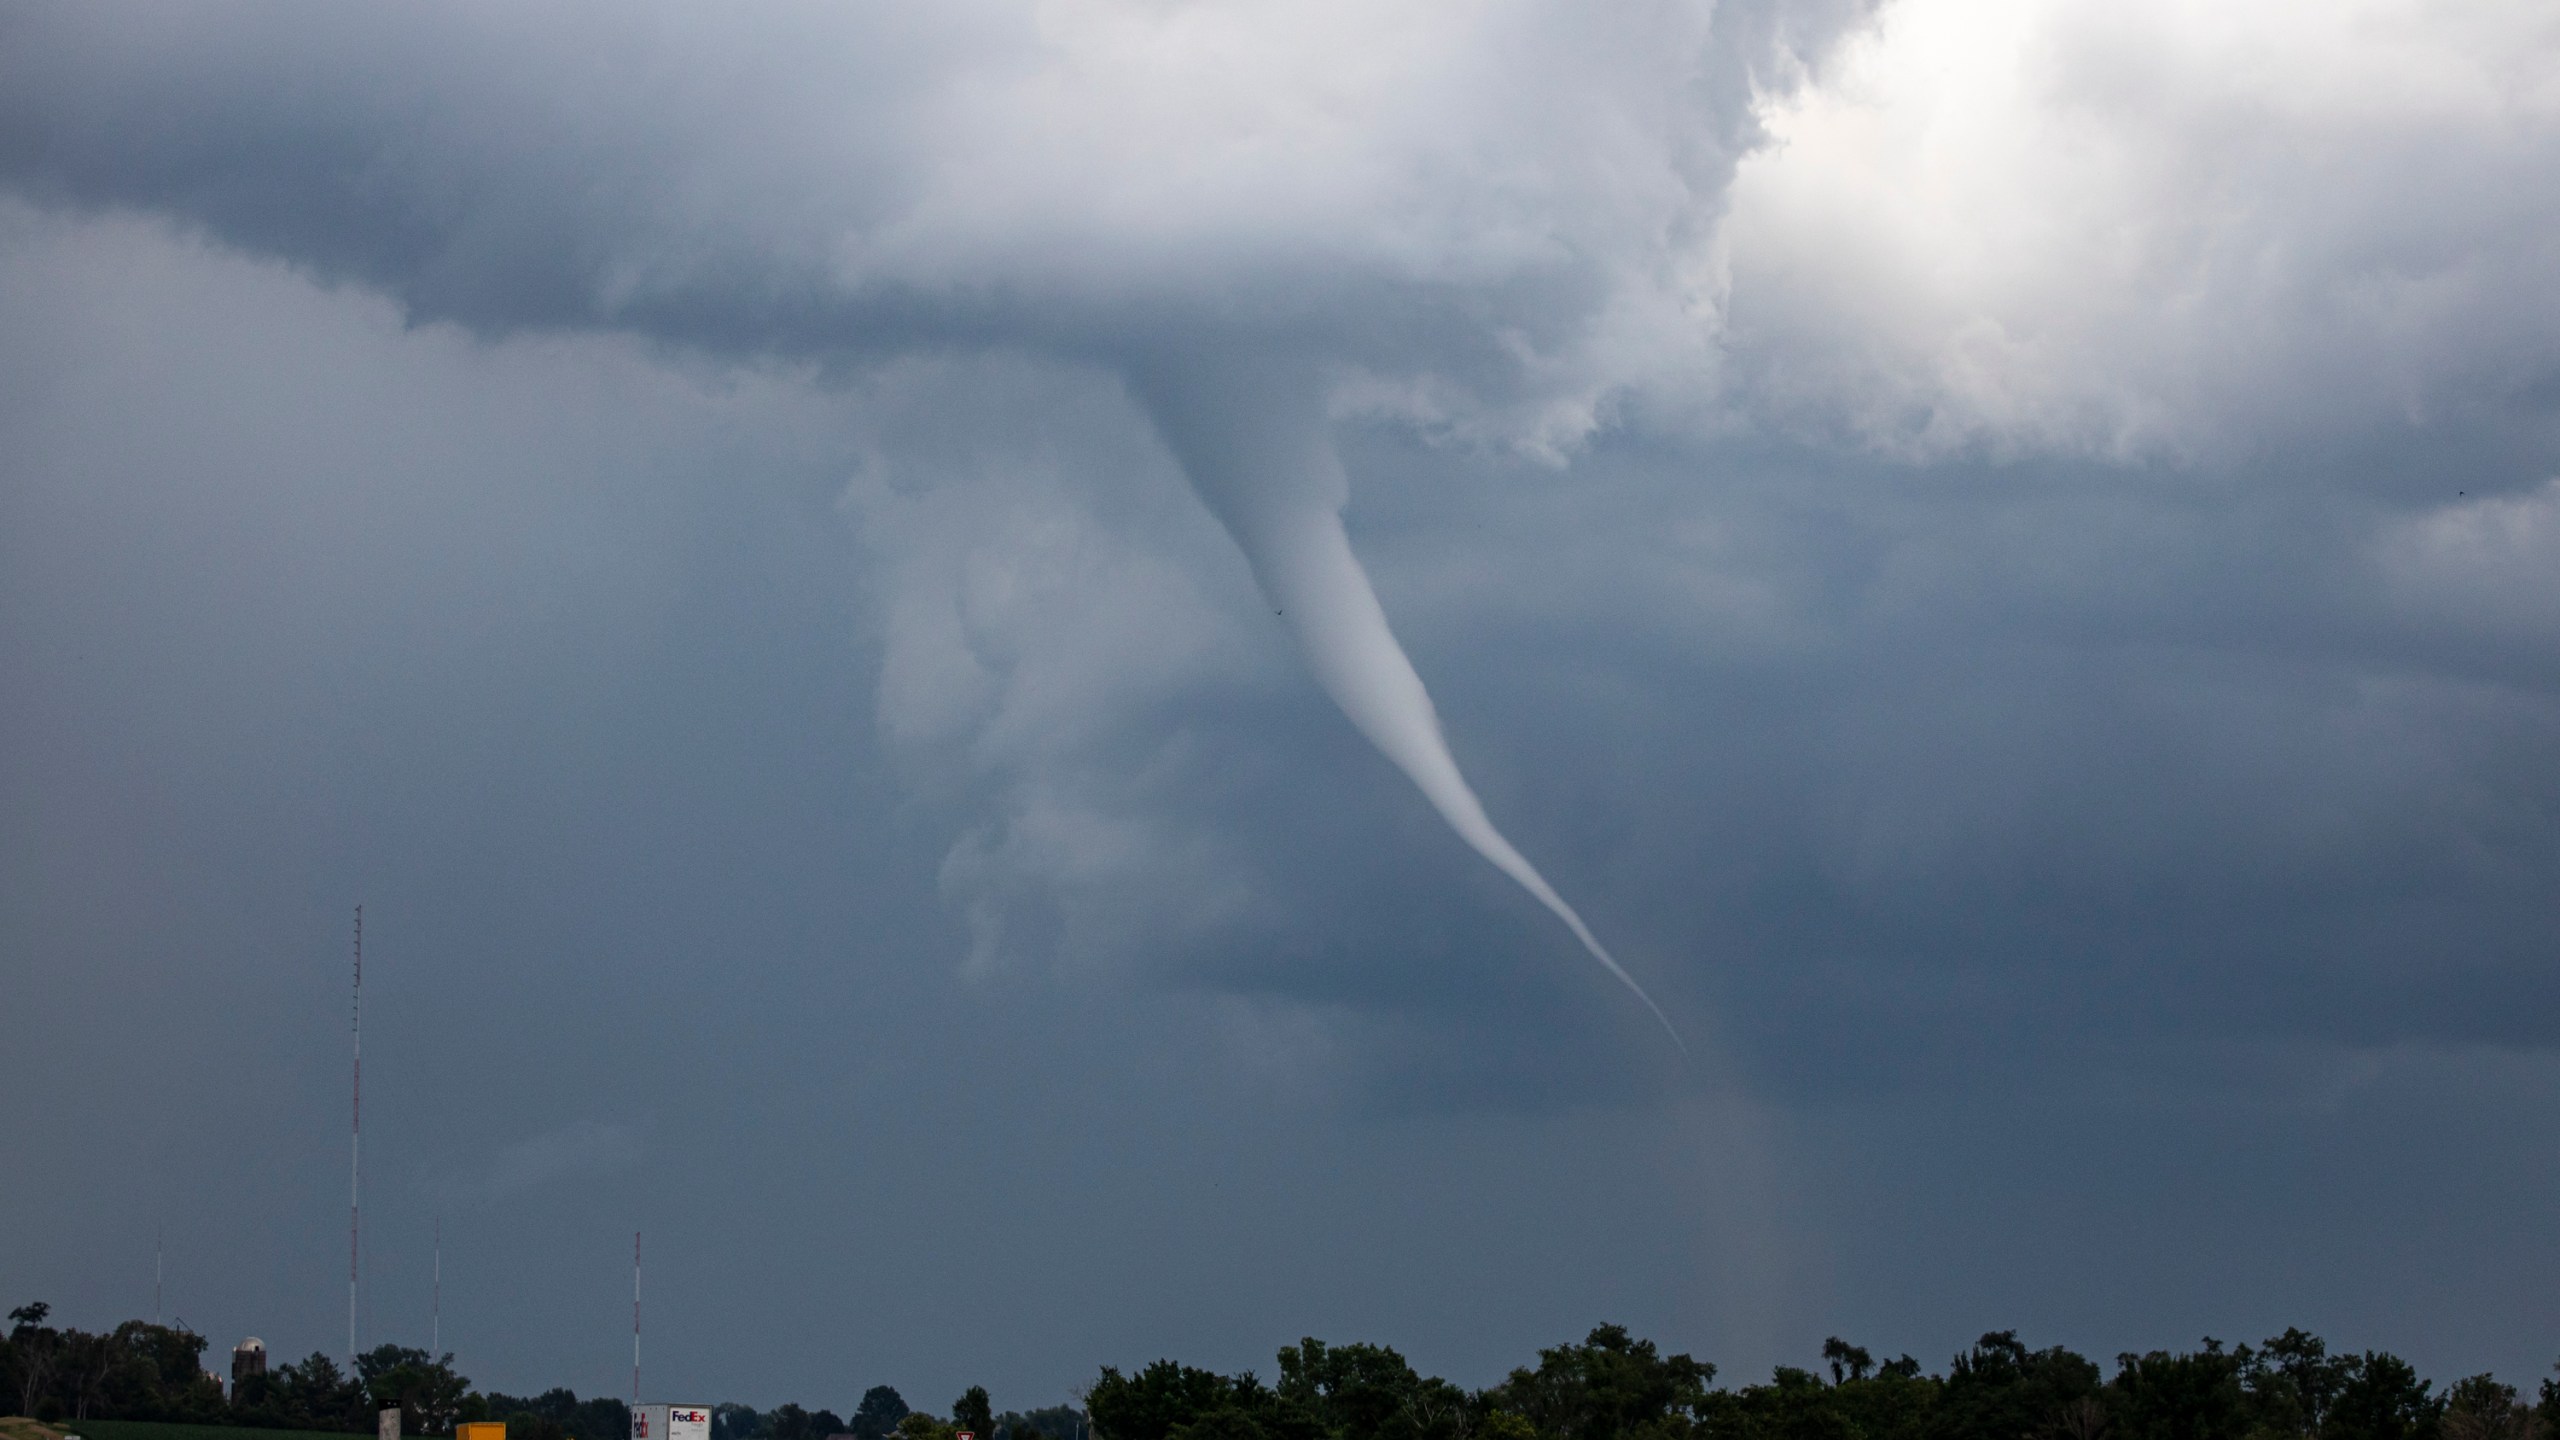 A tornado is seen near Cedar Rapids, Iowa on Tuesday, June 25, 2024. More severe weather was forecast to move into the region Tuesday, potentially bringing large hail, damaging winds and even a brief tornado or two in parts of western Iowa and eastern Nebraska, according to the National Weather Service. (Nick Rohlman/The Gazette via AP)